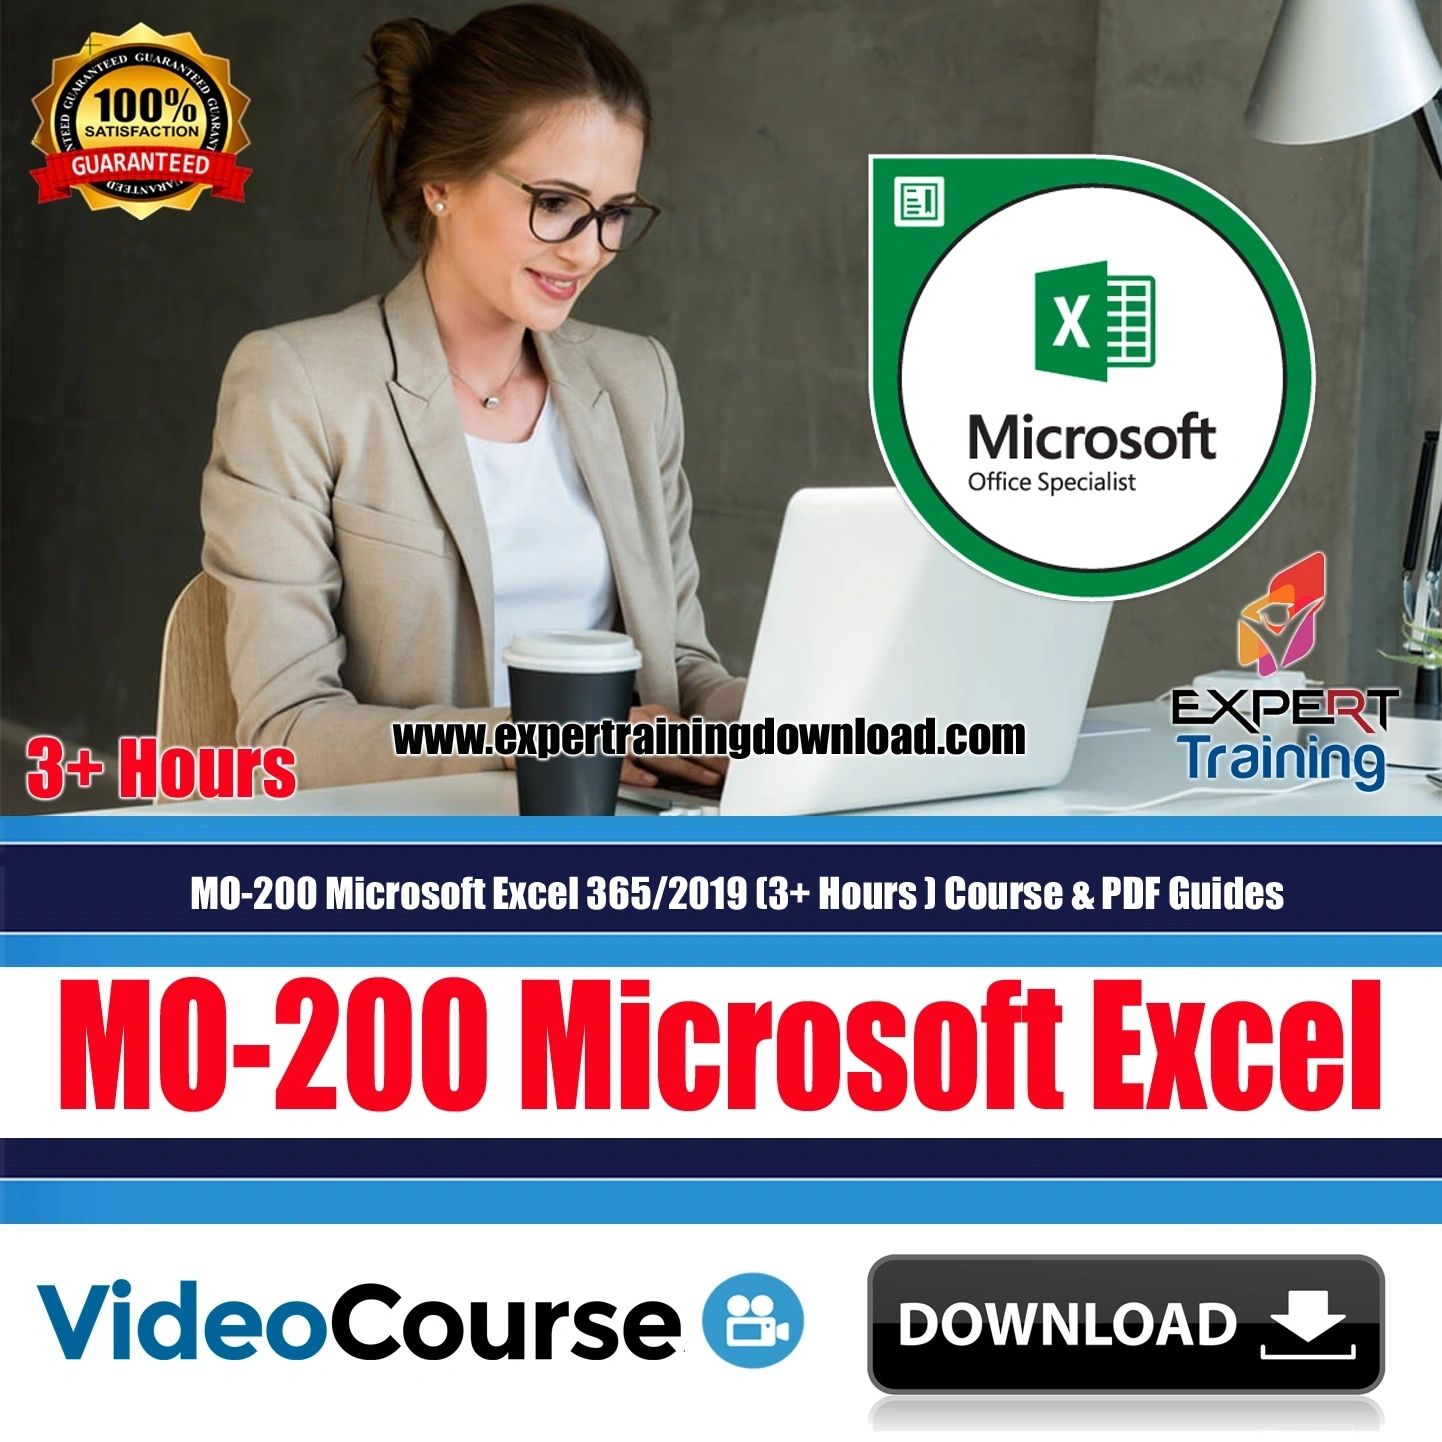 MO-200 Microsoft Excel 365-2019 (3+ Hours ) Course & PDF Guides